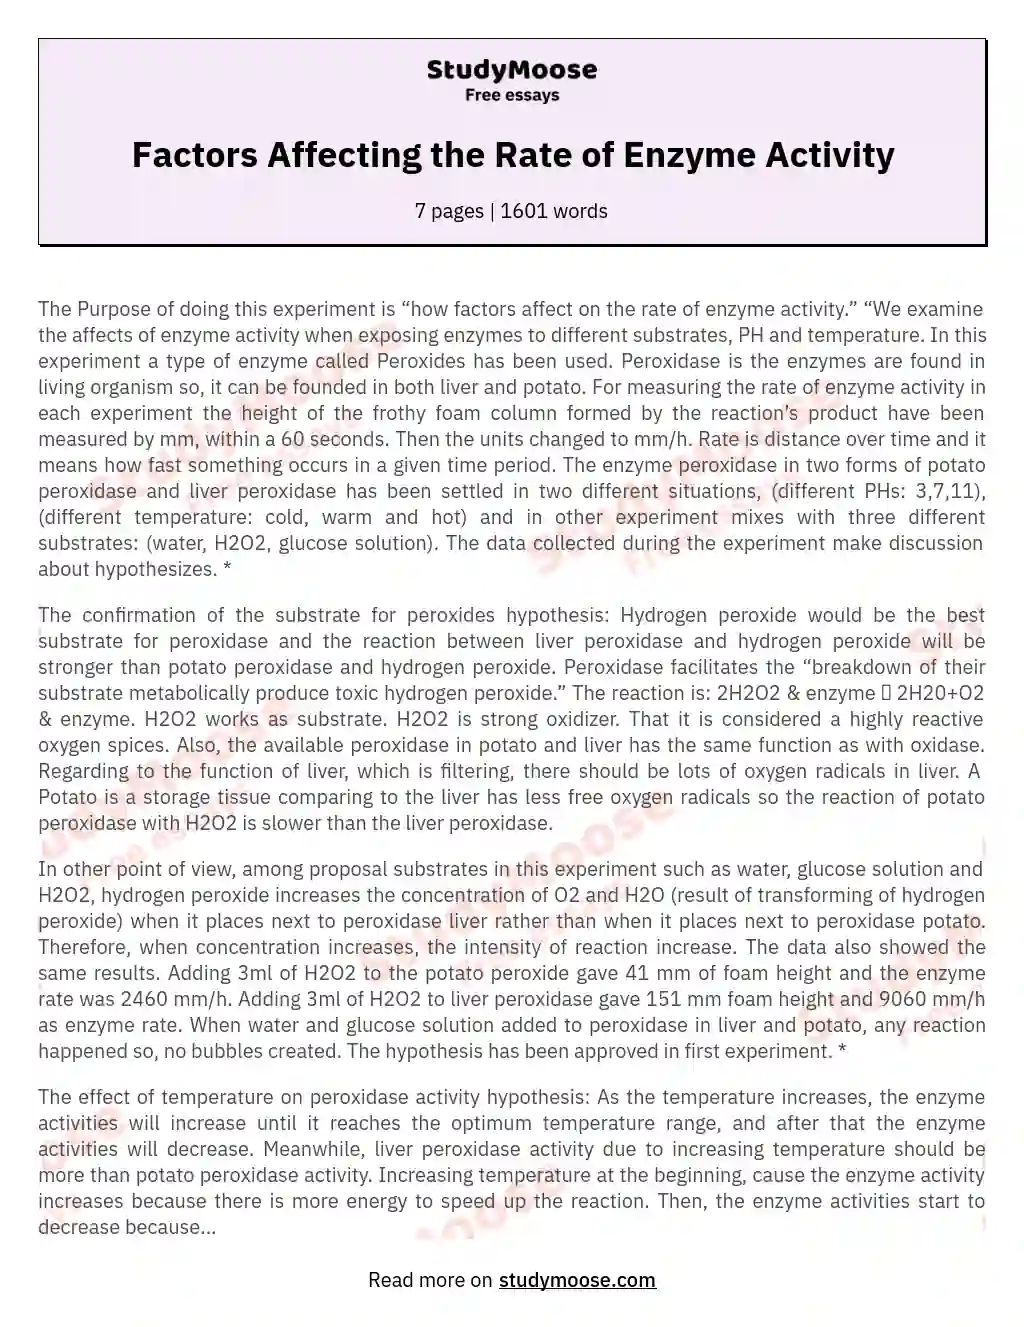 Factors Affecting the Rate of Enzyme Activity essay